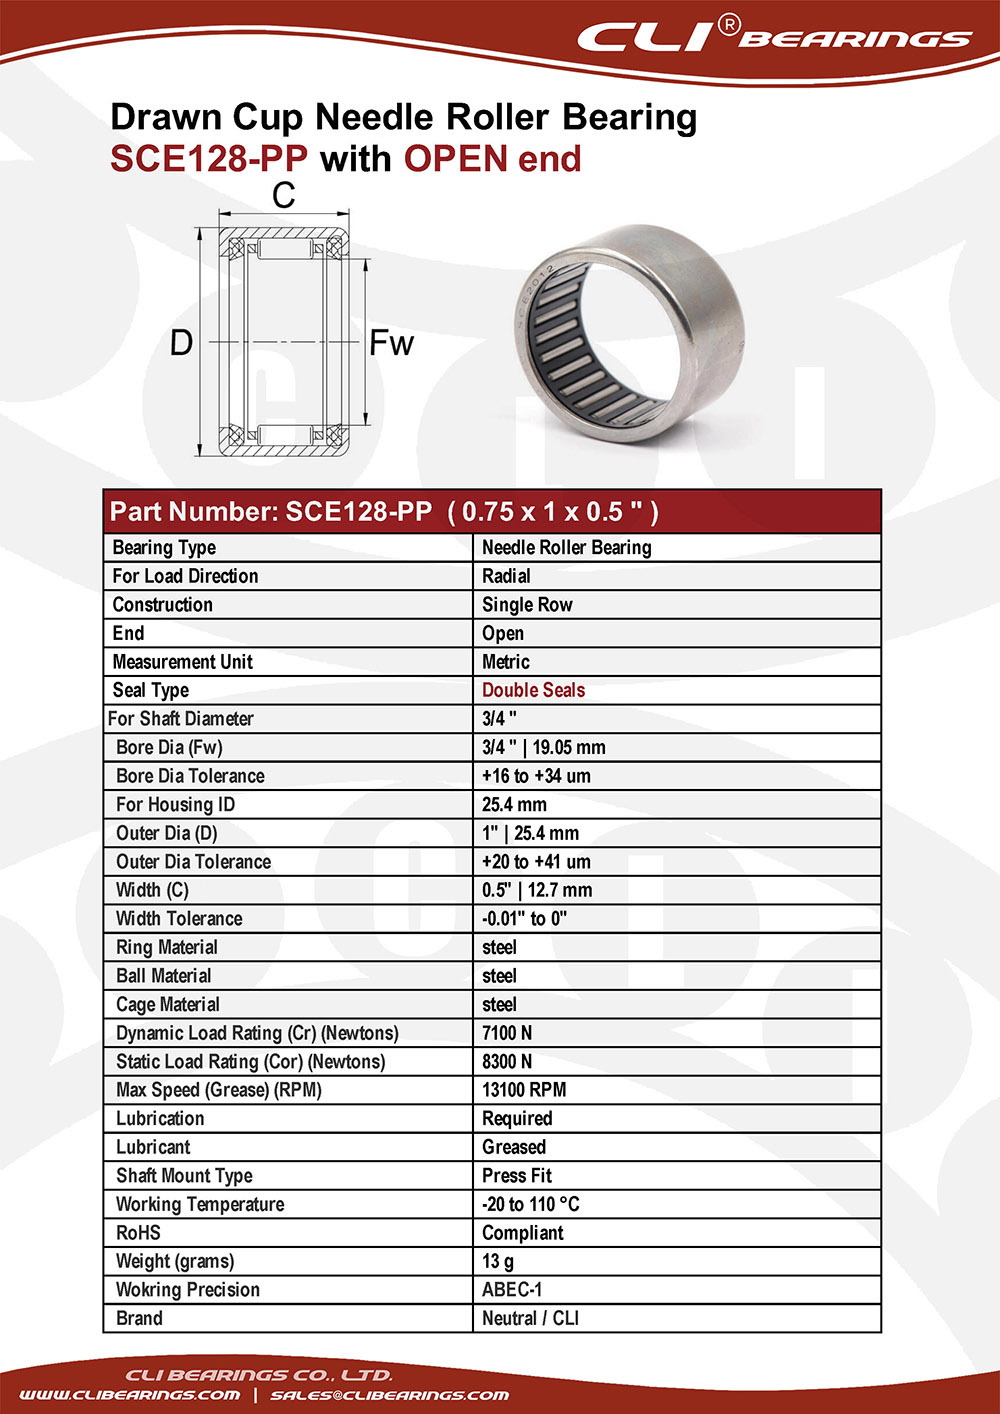 Original sce128 pp 0 75x1x0 5 drawn cup needle roller bearings with double seals   cli bearings co ltd nw